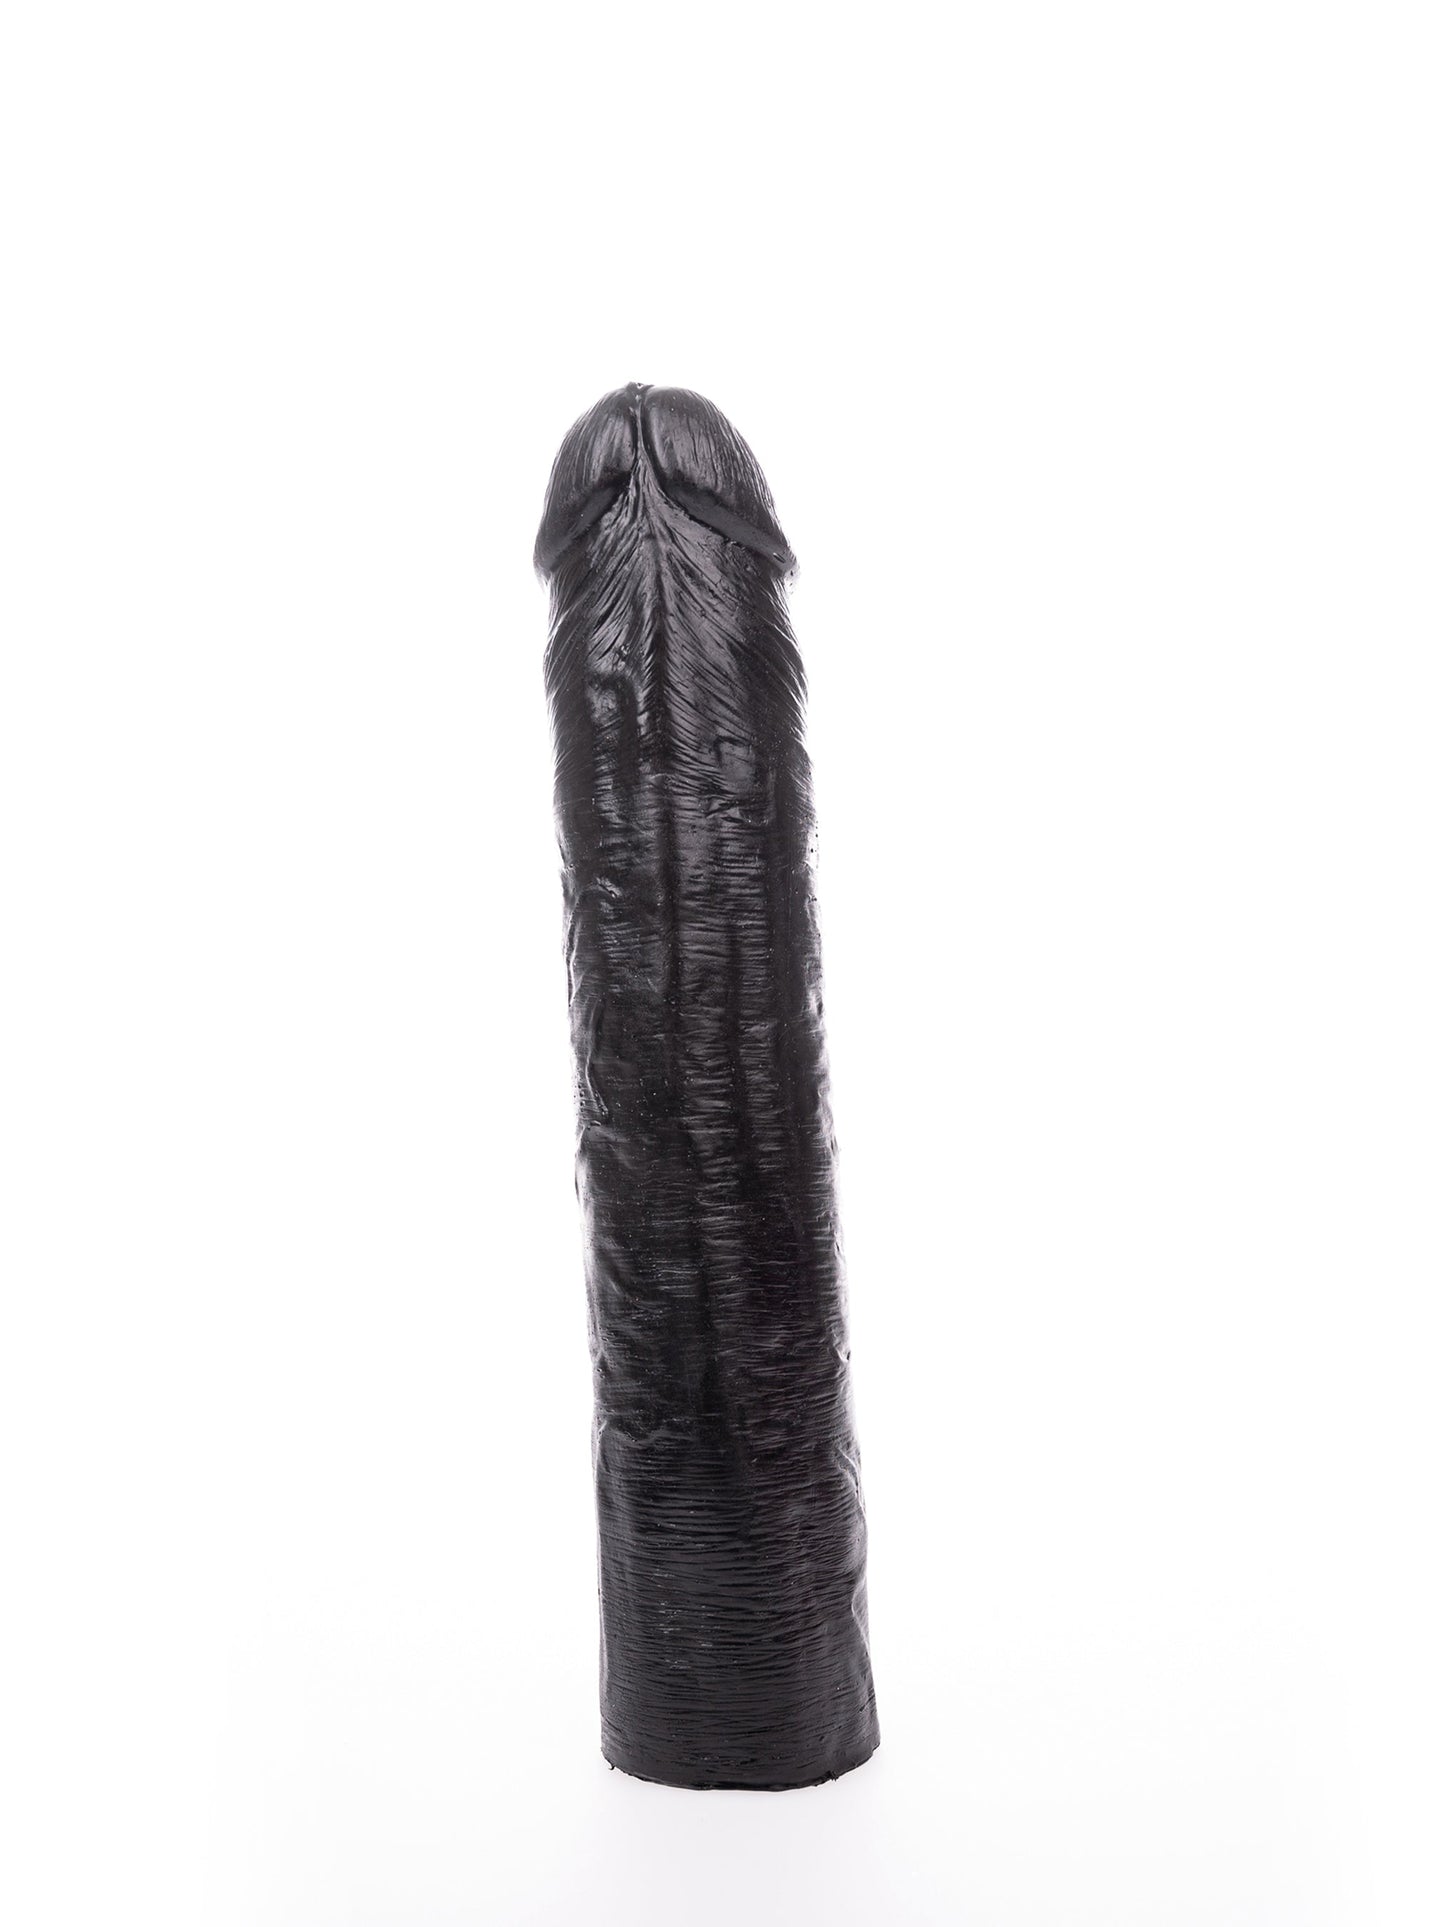 Hung System - Dildo Realistic Benny without balls 26 cm BOX - Black